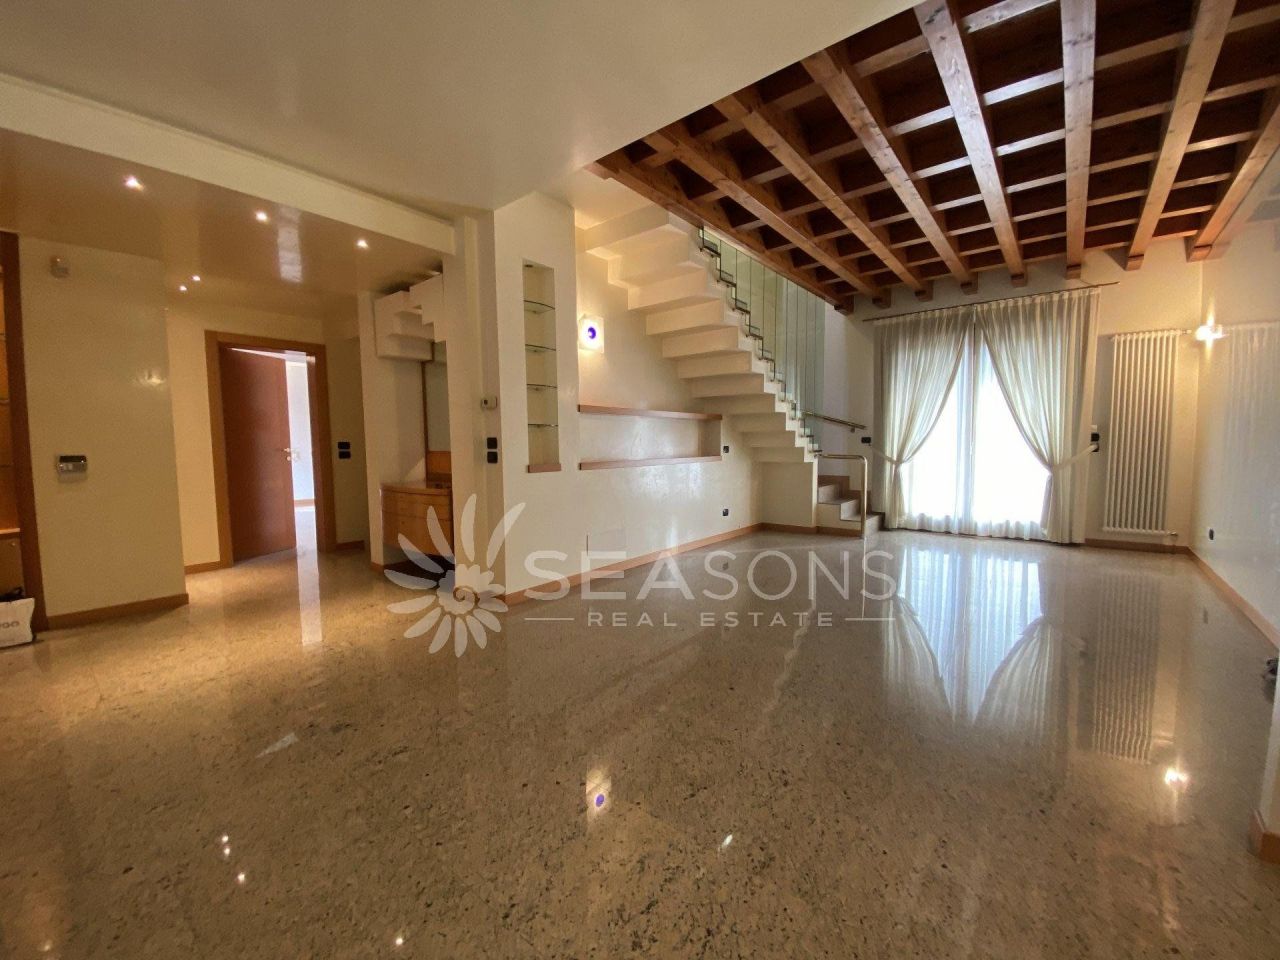 Penthouse in Vicenza, Italy - picture 1